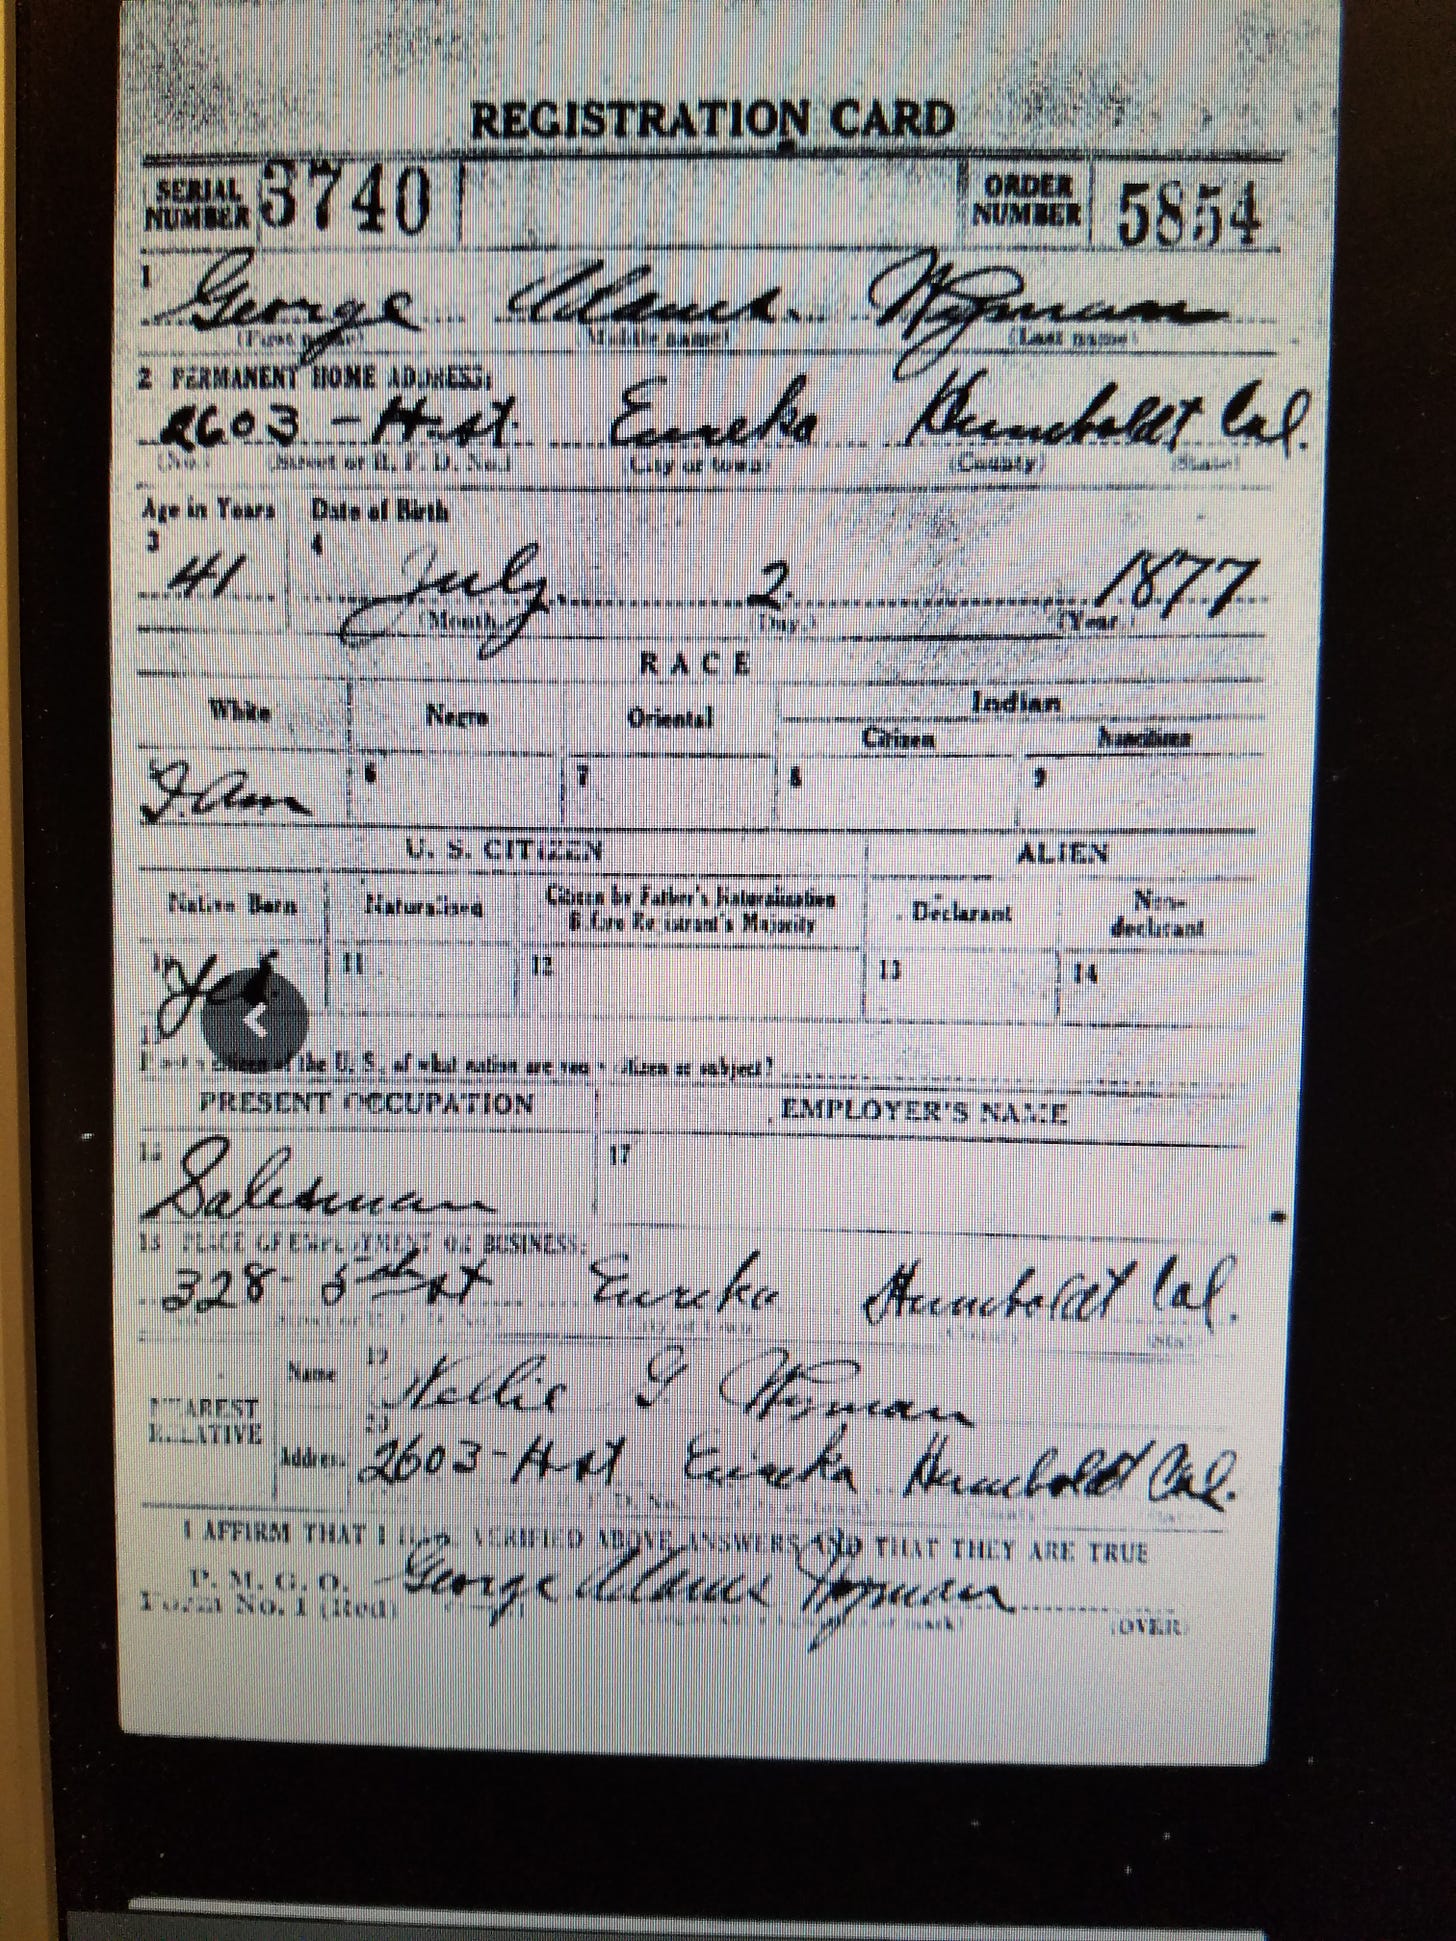 Digitized Registration Card filled out by George A. Wyman in 1918, when George Wyman was 41 years old. Information on the card:  Serial Number 3740 Order Number 5854 Name: George Adams Wyman Permanent Home Address: 2603 H St., Eureka, Humboldt County, Cal Age: 41 Date of Birth July 2, 1877 Race: White Native Born: Yes Present Occupation: Salesman Place of Employment or Business 328 5th Street, Eureka, Humboldt County, Cal Nearest Relative: Nellie G Wyman 2603 H St. Eureka, Humboldt County, Cal. I AFFIRM THAT I HAVE VERIFIED ABOVE ANSWERS AND THAT THEY ARE TRUE Signed George Adams Wyman